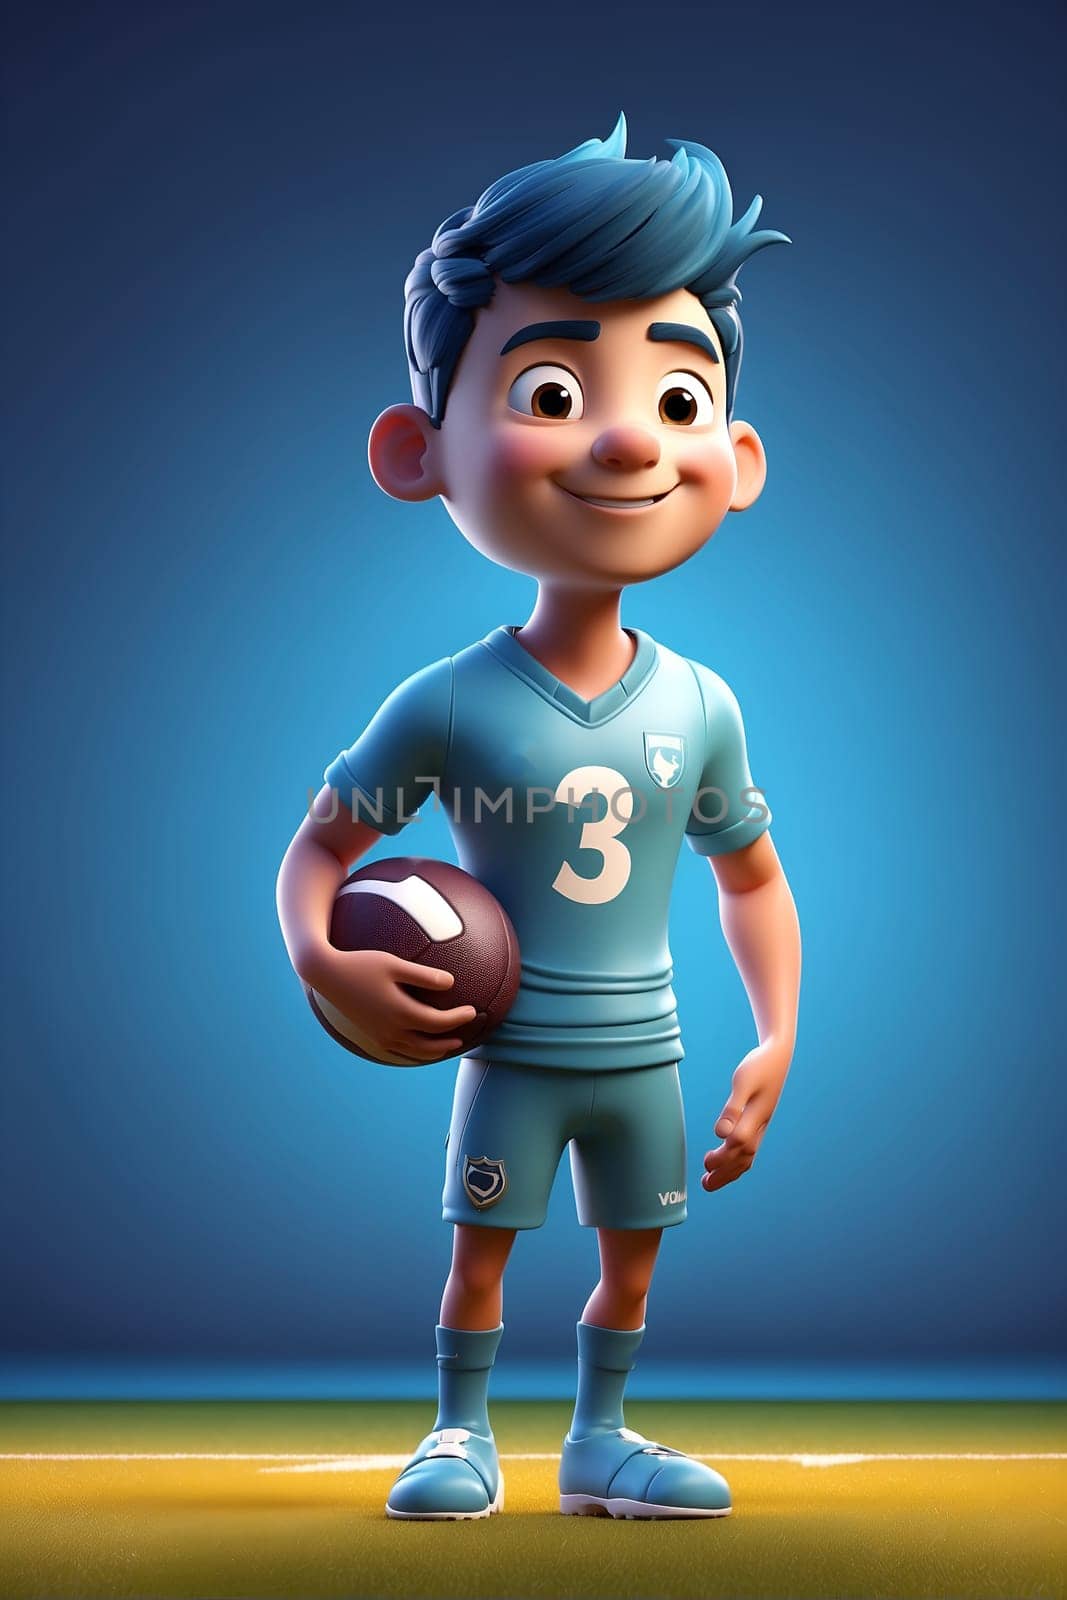 A cartoon character confidently holds a football on a vibrant green field ready to make a play.